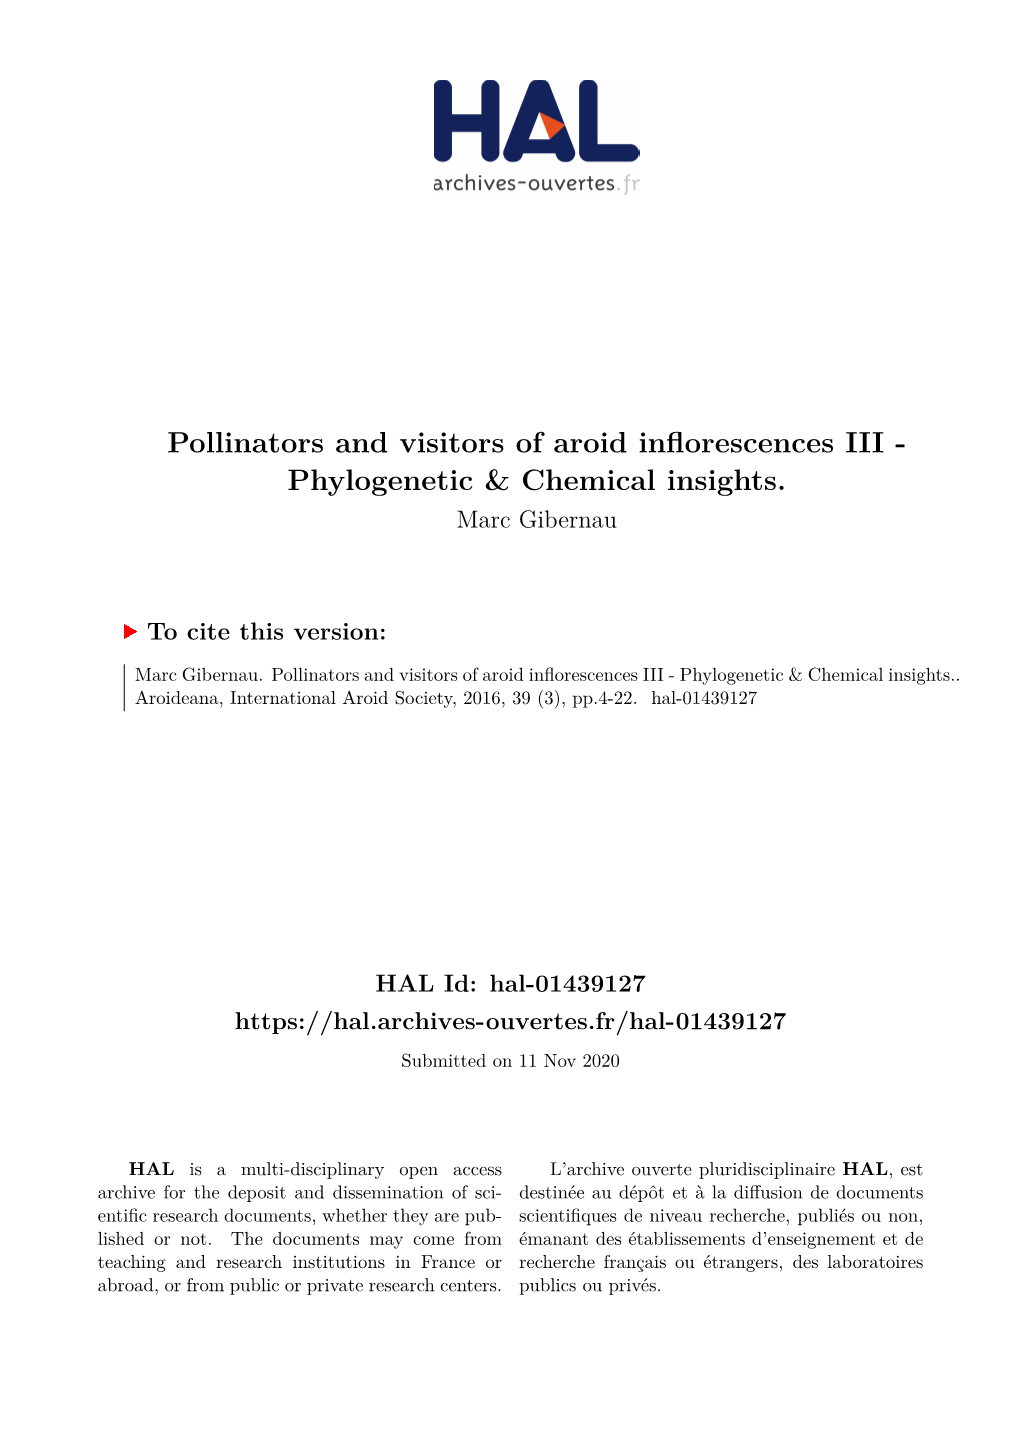 Pollinators and Visitors of Aroid Inflorescences III - Phylogenetic & Chemical Insights